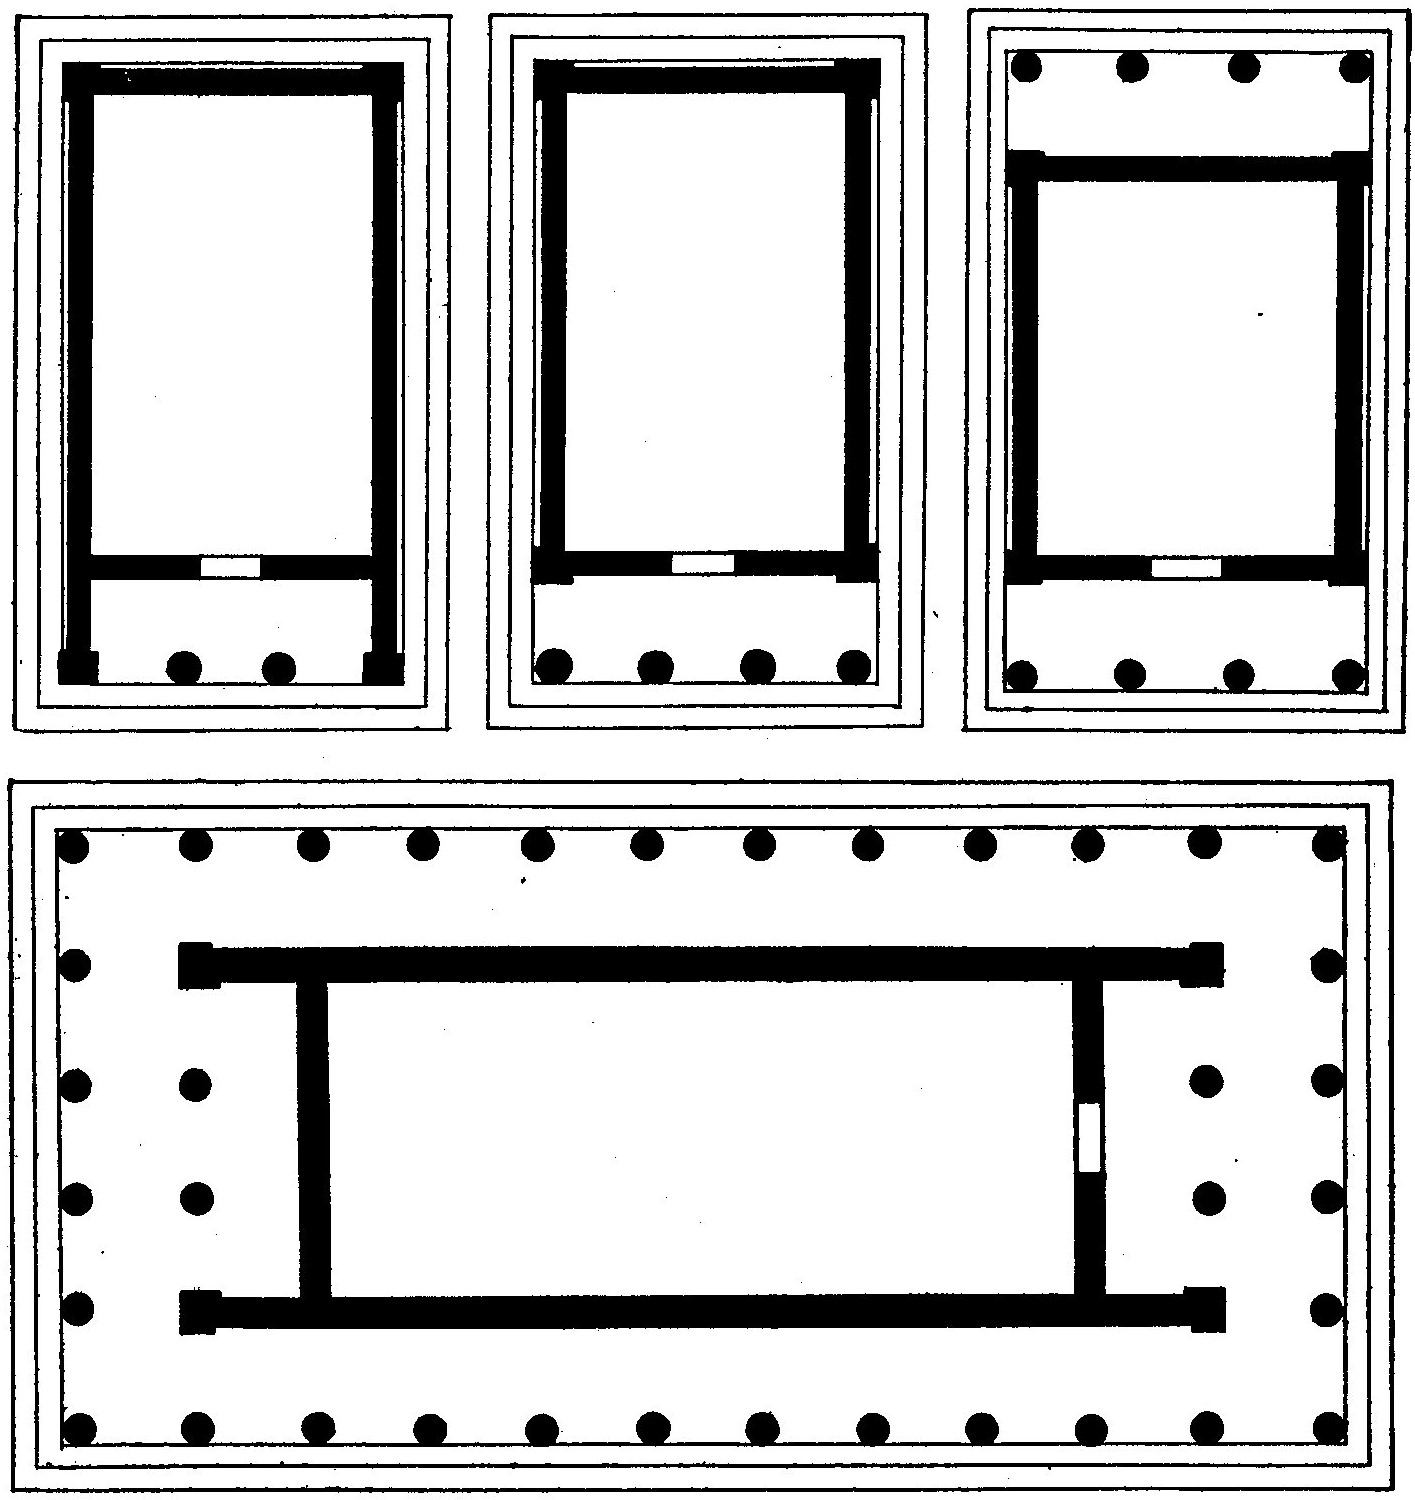 GROUND PLANS OF GREEK TEMPLES FROM THE SIMPLE TO THE ELABORATE The variety is much greater than can be shown here. The lower is the ground plan of the so-called Temple of Theseus at Athens.